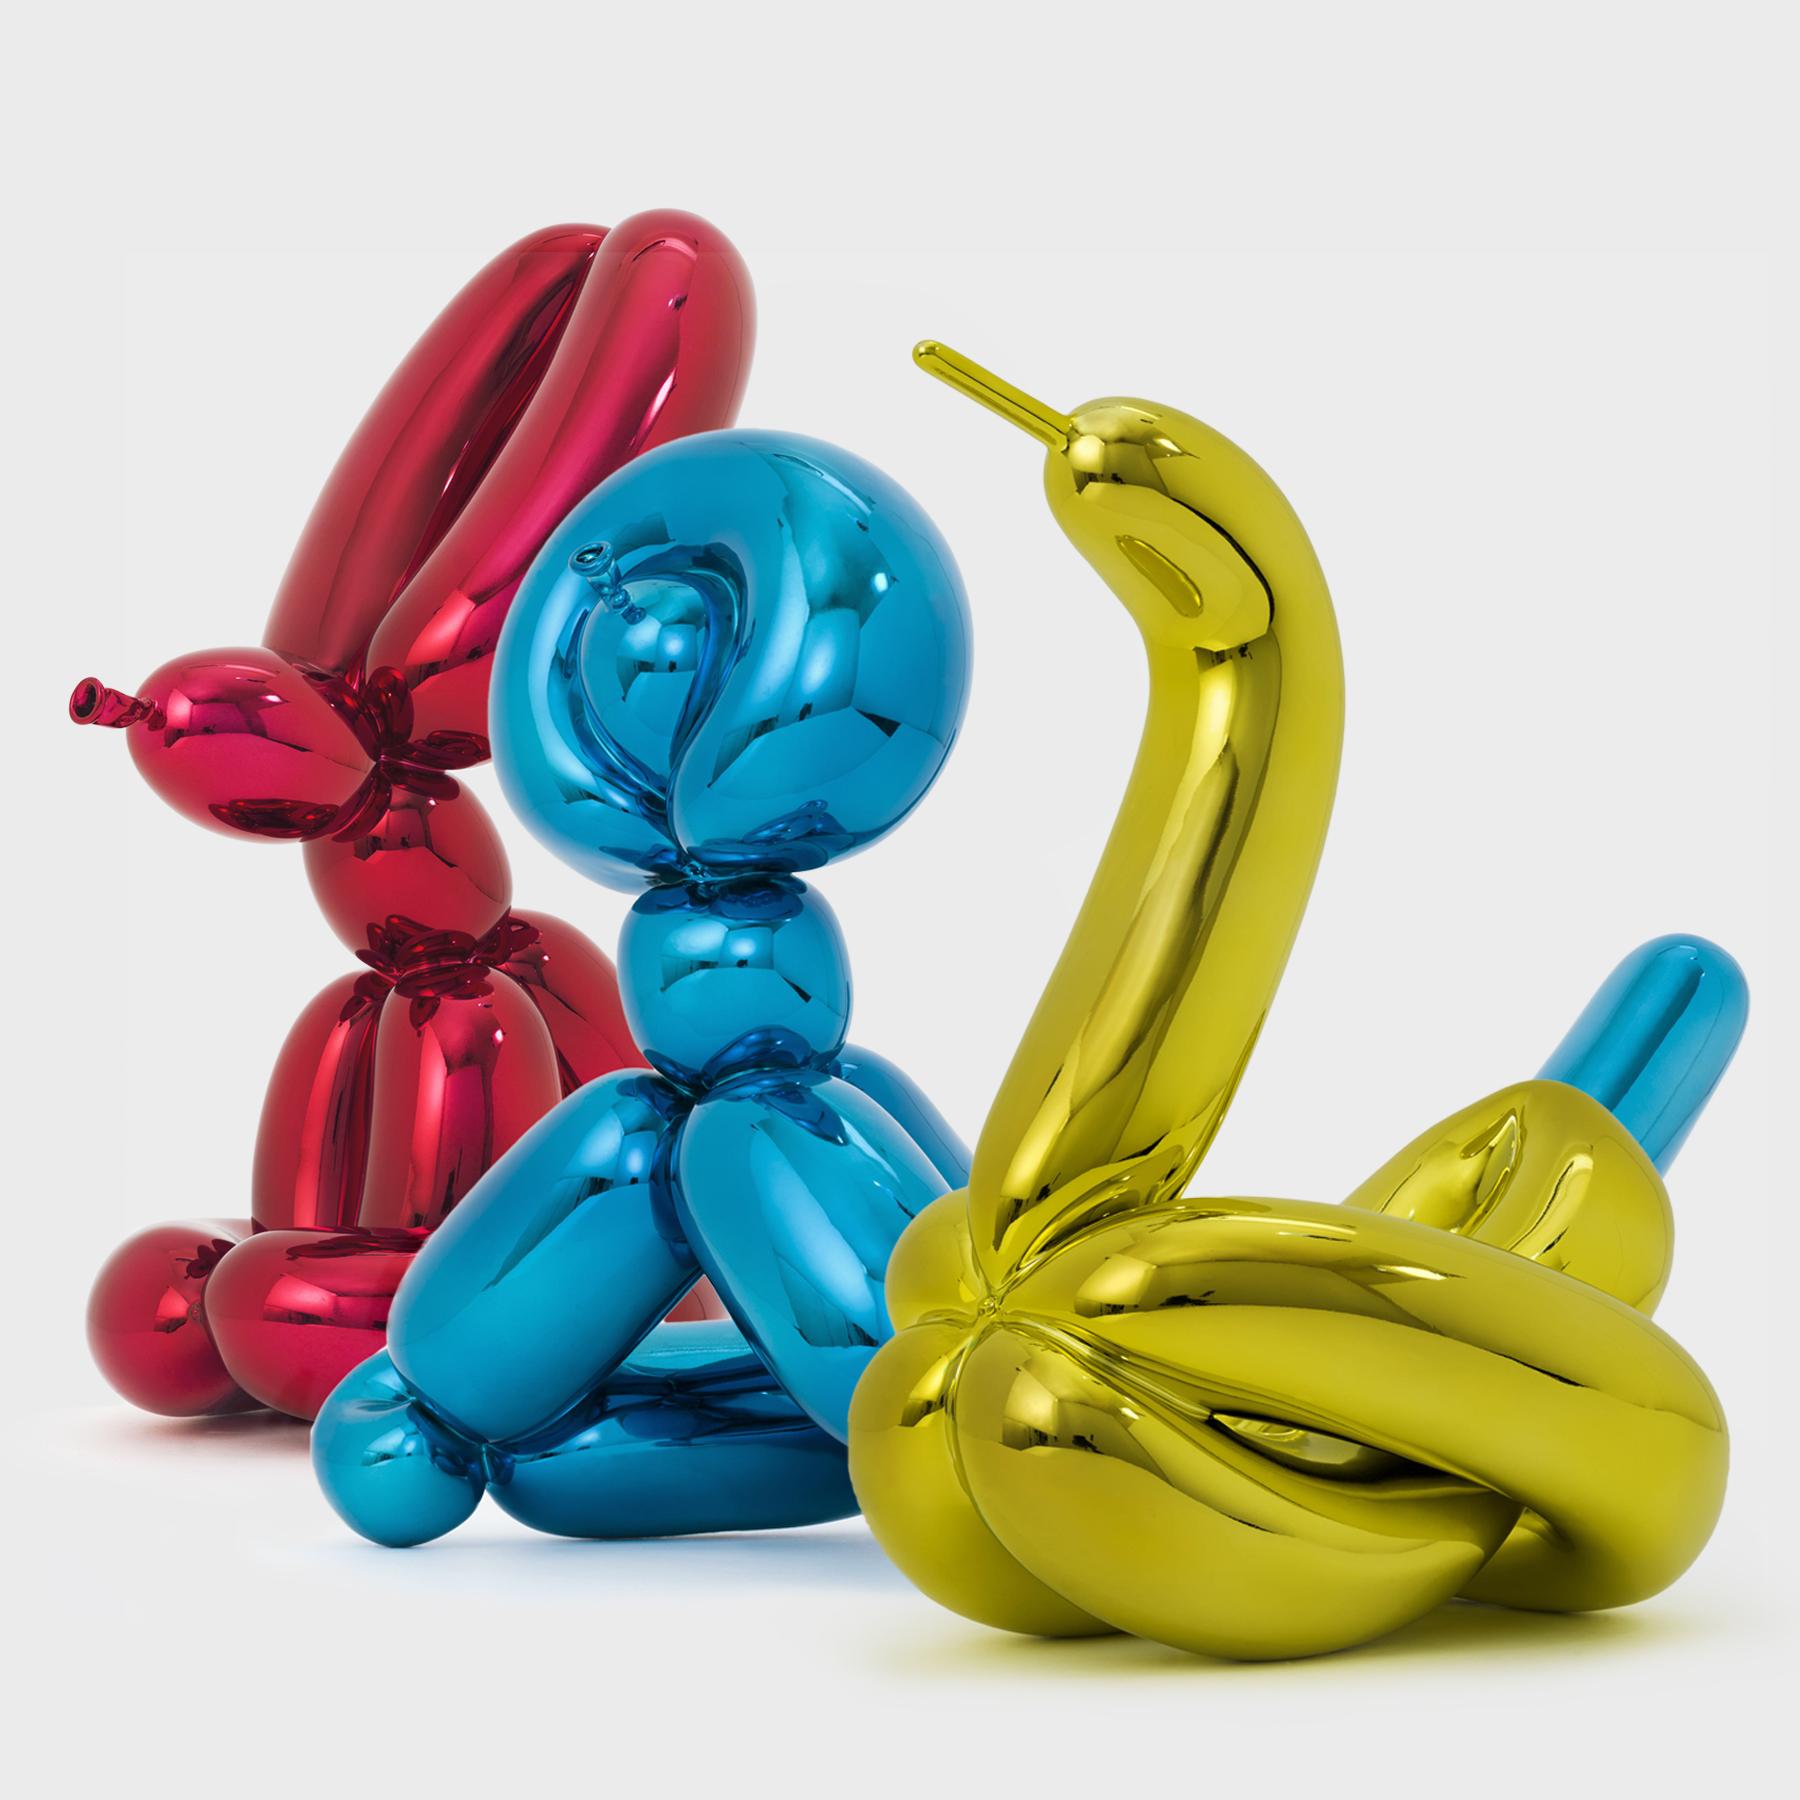 This set of Jeff Koons' Balloon Animals includes Balloon Rabbit, Balloon Monkey and Balloon Swan, made of highly reflective porcelain. Incorporating the vocabulary of his iconic Celebration sculptures, this set marks a spectacular chapter of the